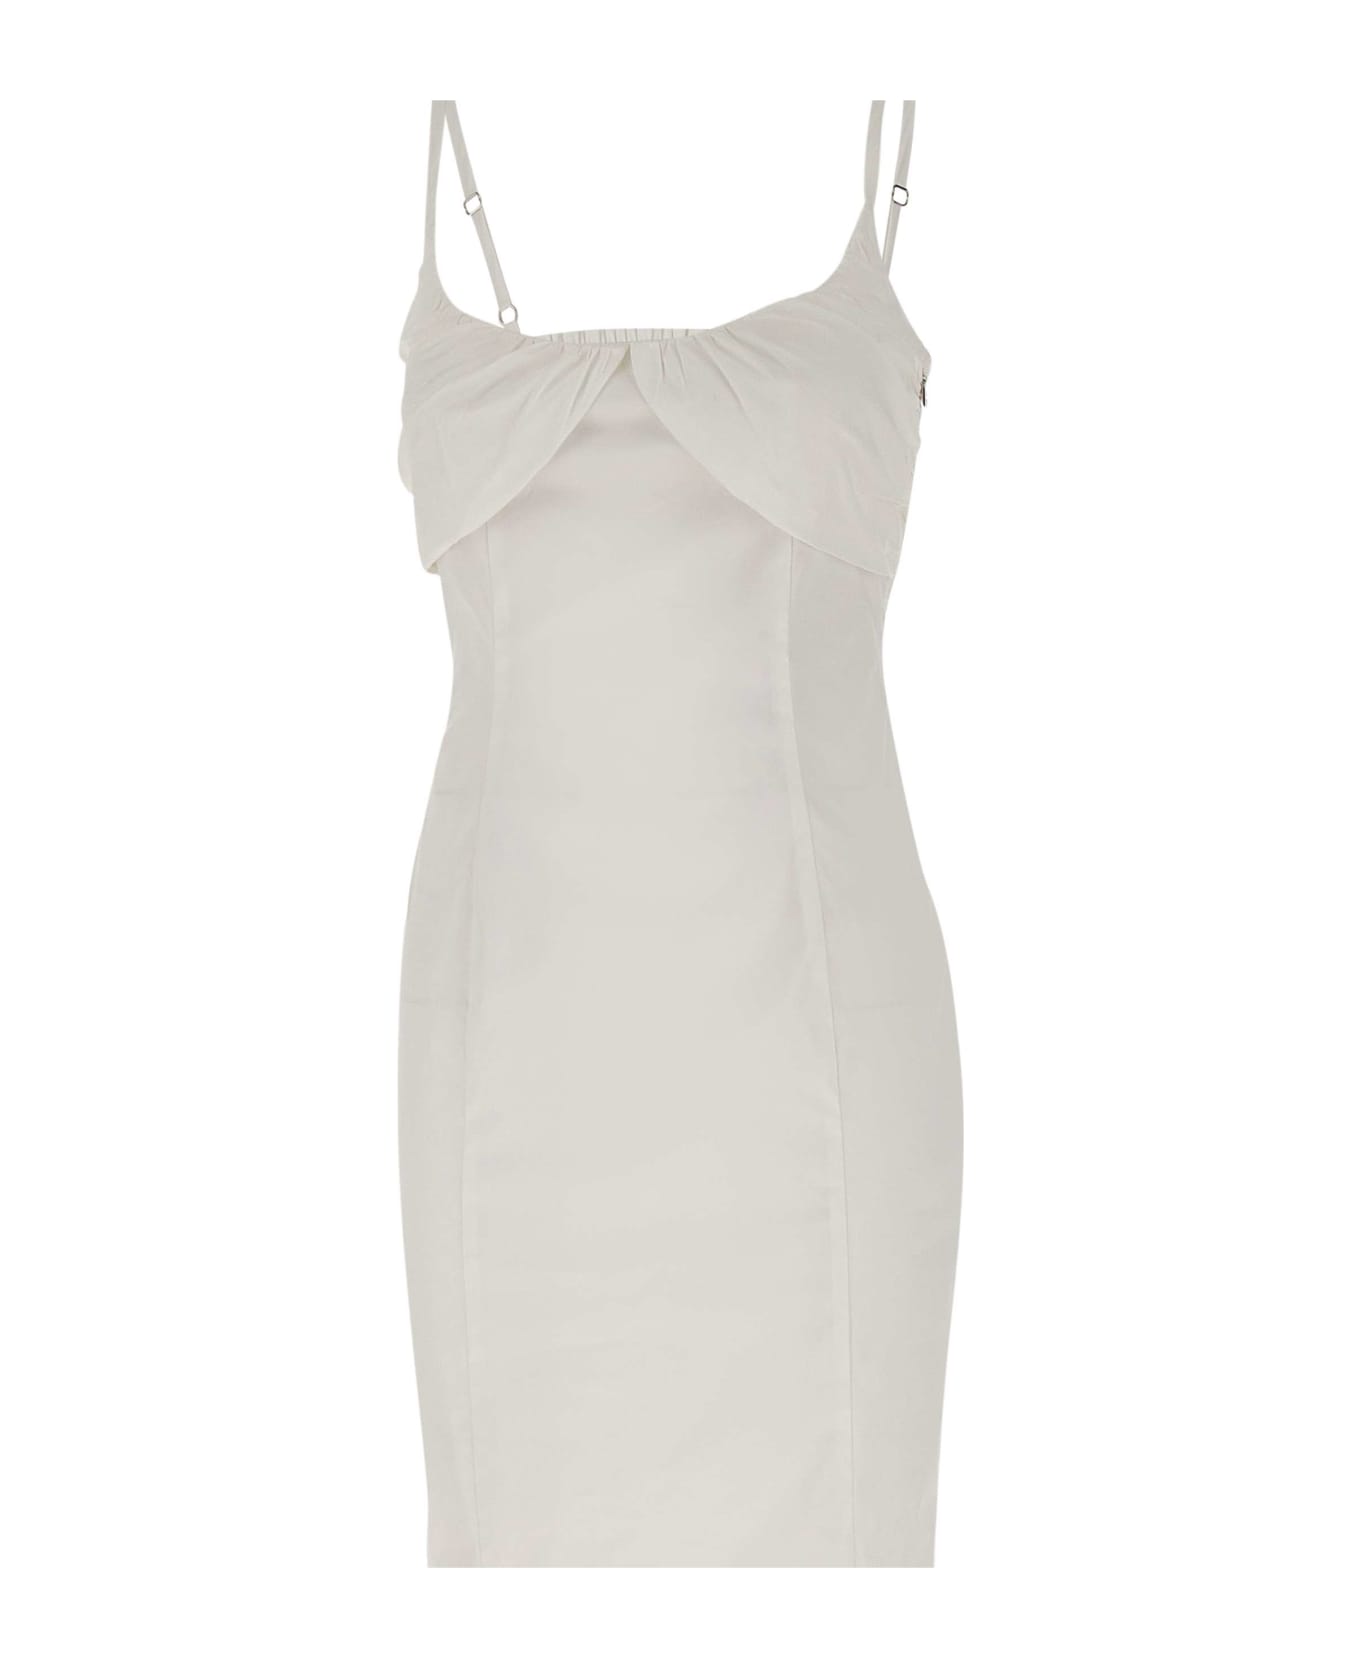 Rotate by Birger Christensen "ruched Cup Midi Dress" Cotton Dress - WHITE